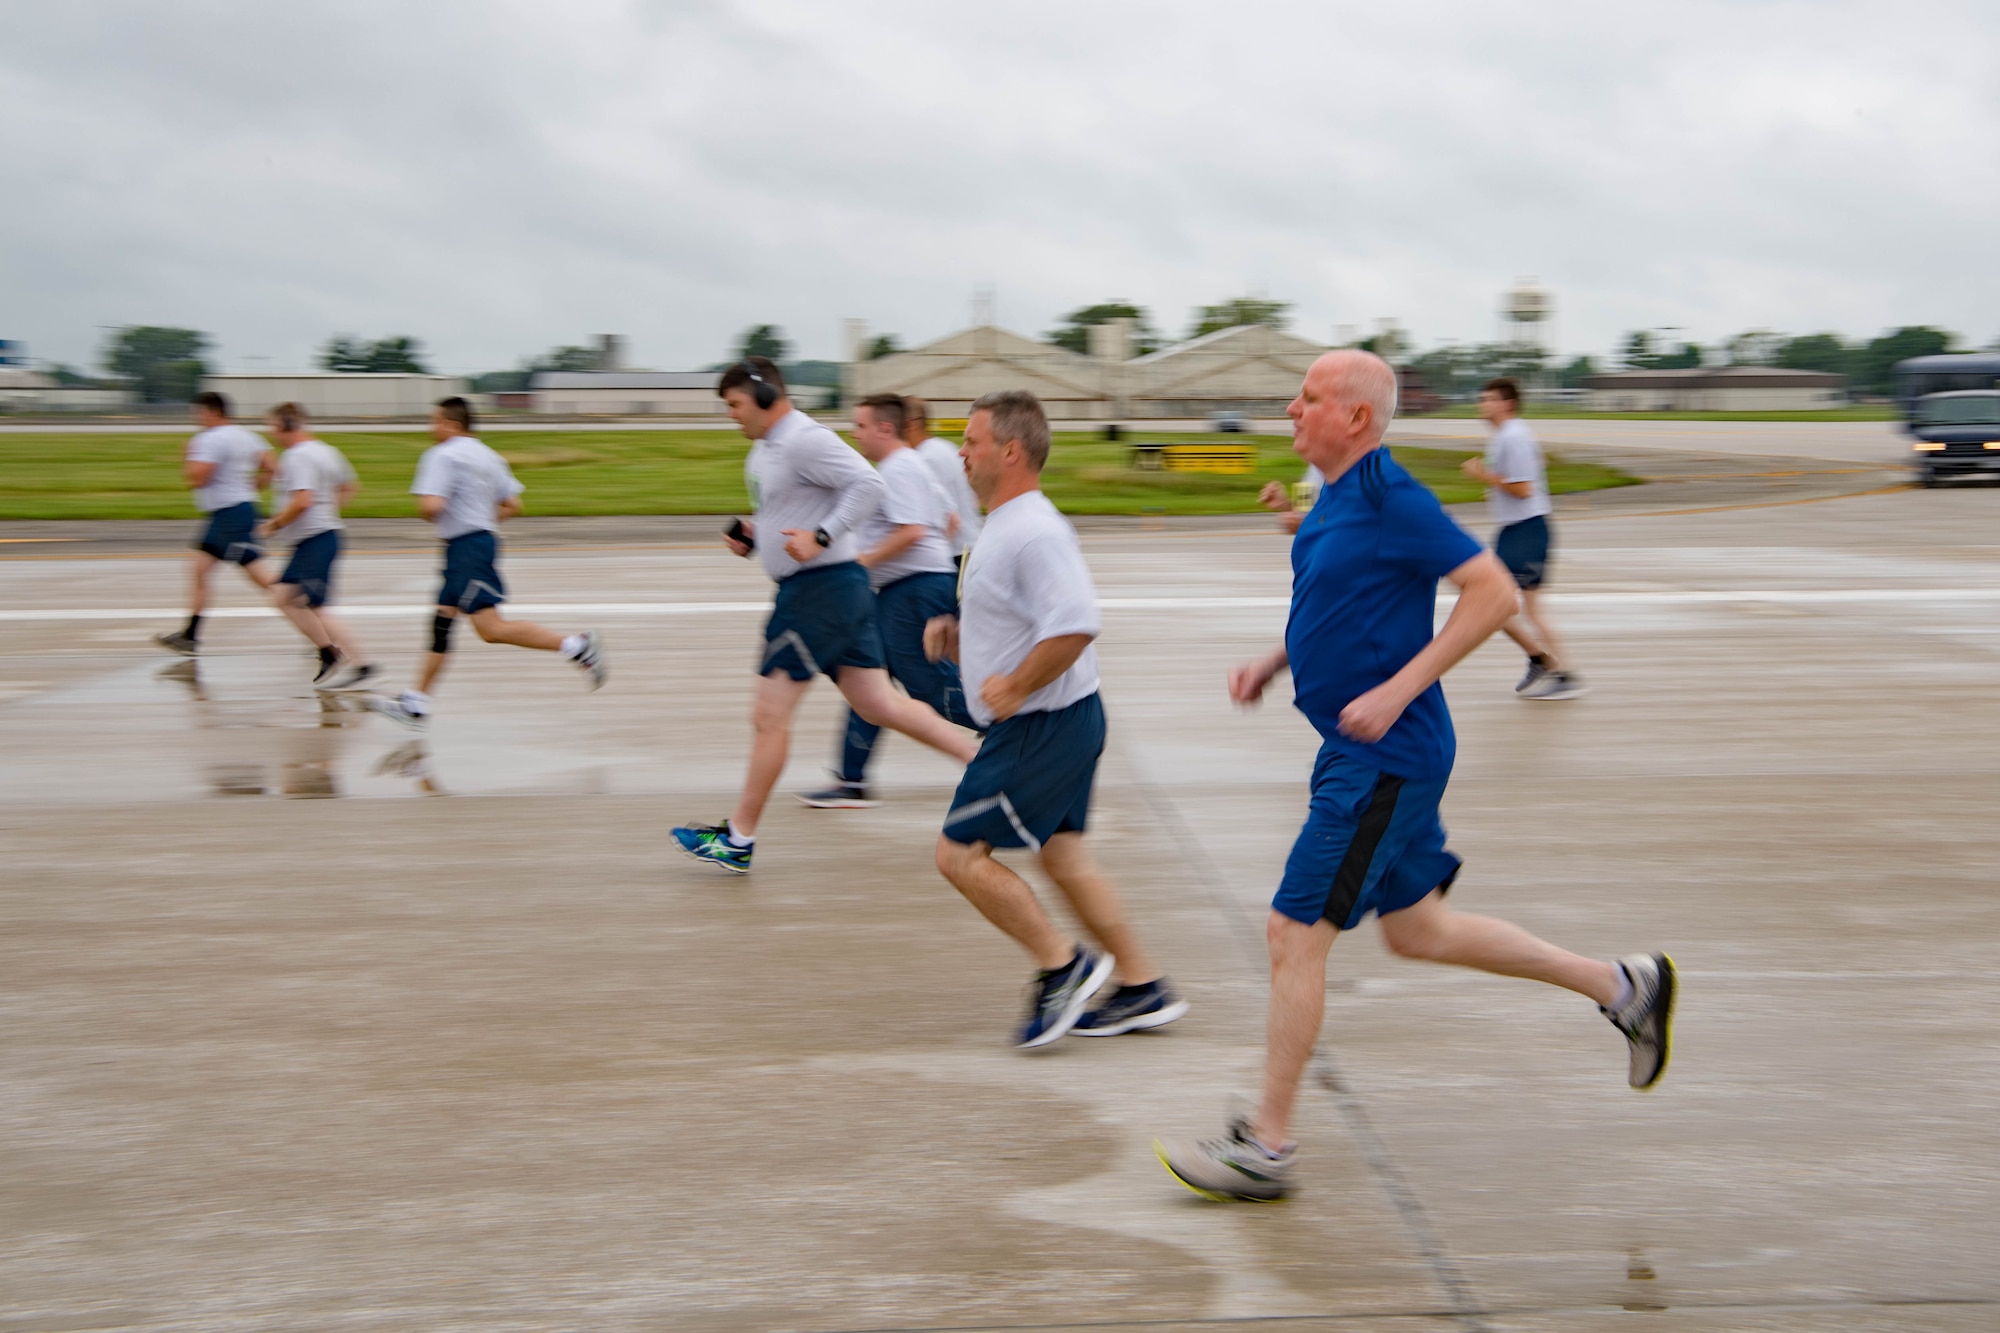 Col. Thom Pemberton, 434th Air Refueling Wing commander, runs with Grissom Airmen during the physical fitness assessment at Grissom Air Reserve Base, Indiana, July 11, 2021. Grissom began fitness testing for the first time in 15 months since the COVID-19 pandemic. (U.S. Air Force photo by Staff Sgt. Jeremy Blocker)